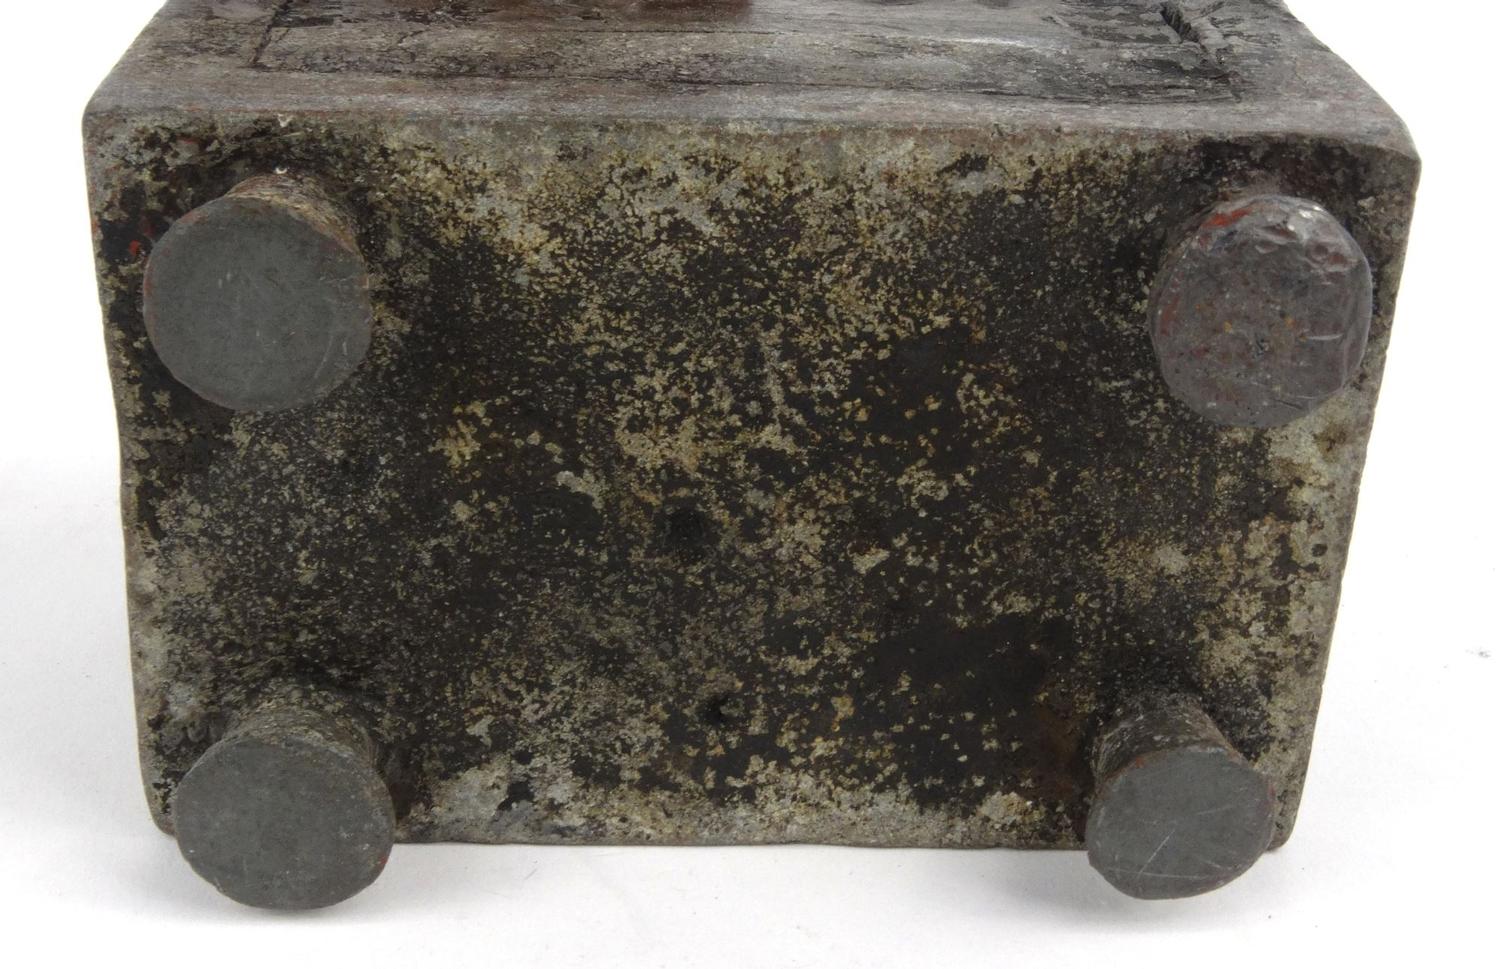 Antique lead slavery interest box, the top decorated with a man and marked 'Humanity', 13.5cm - Image 6 of 6